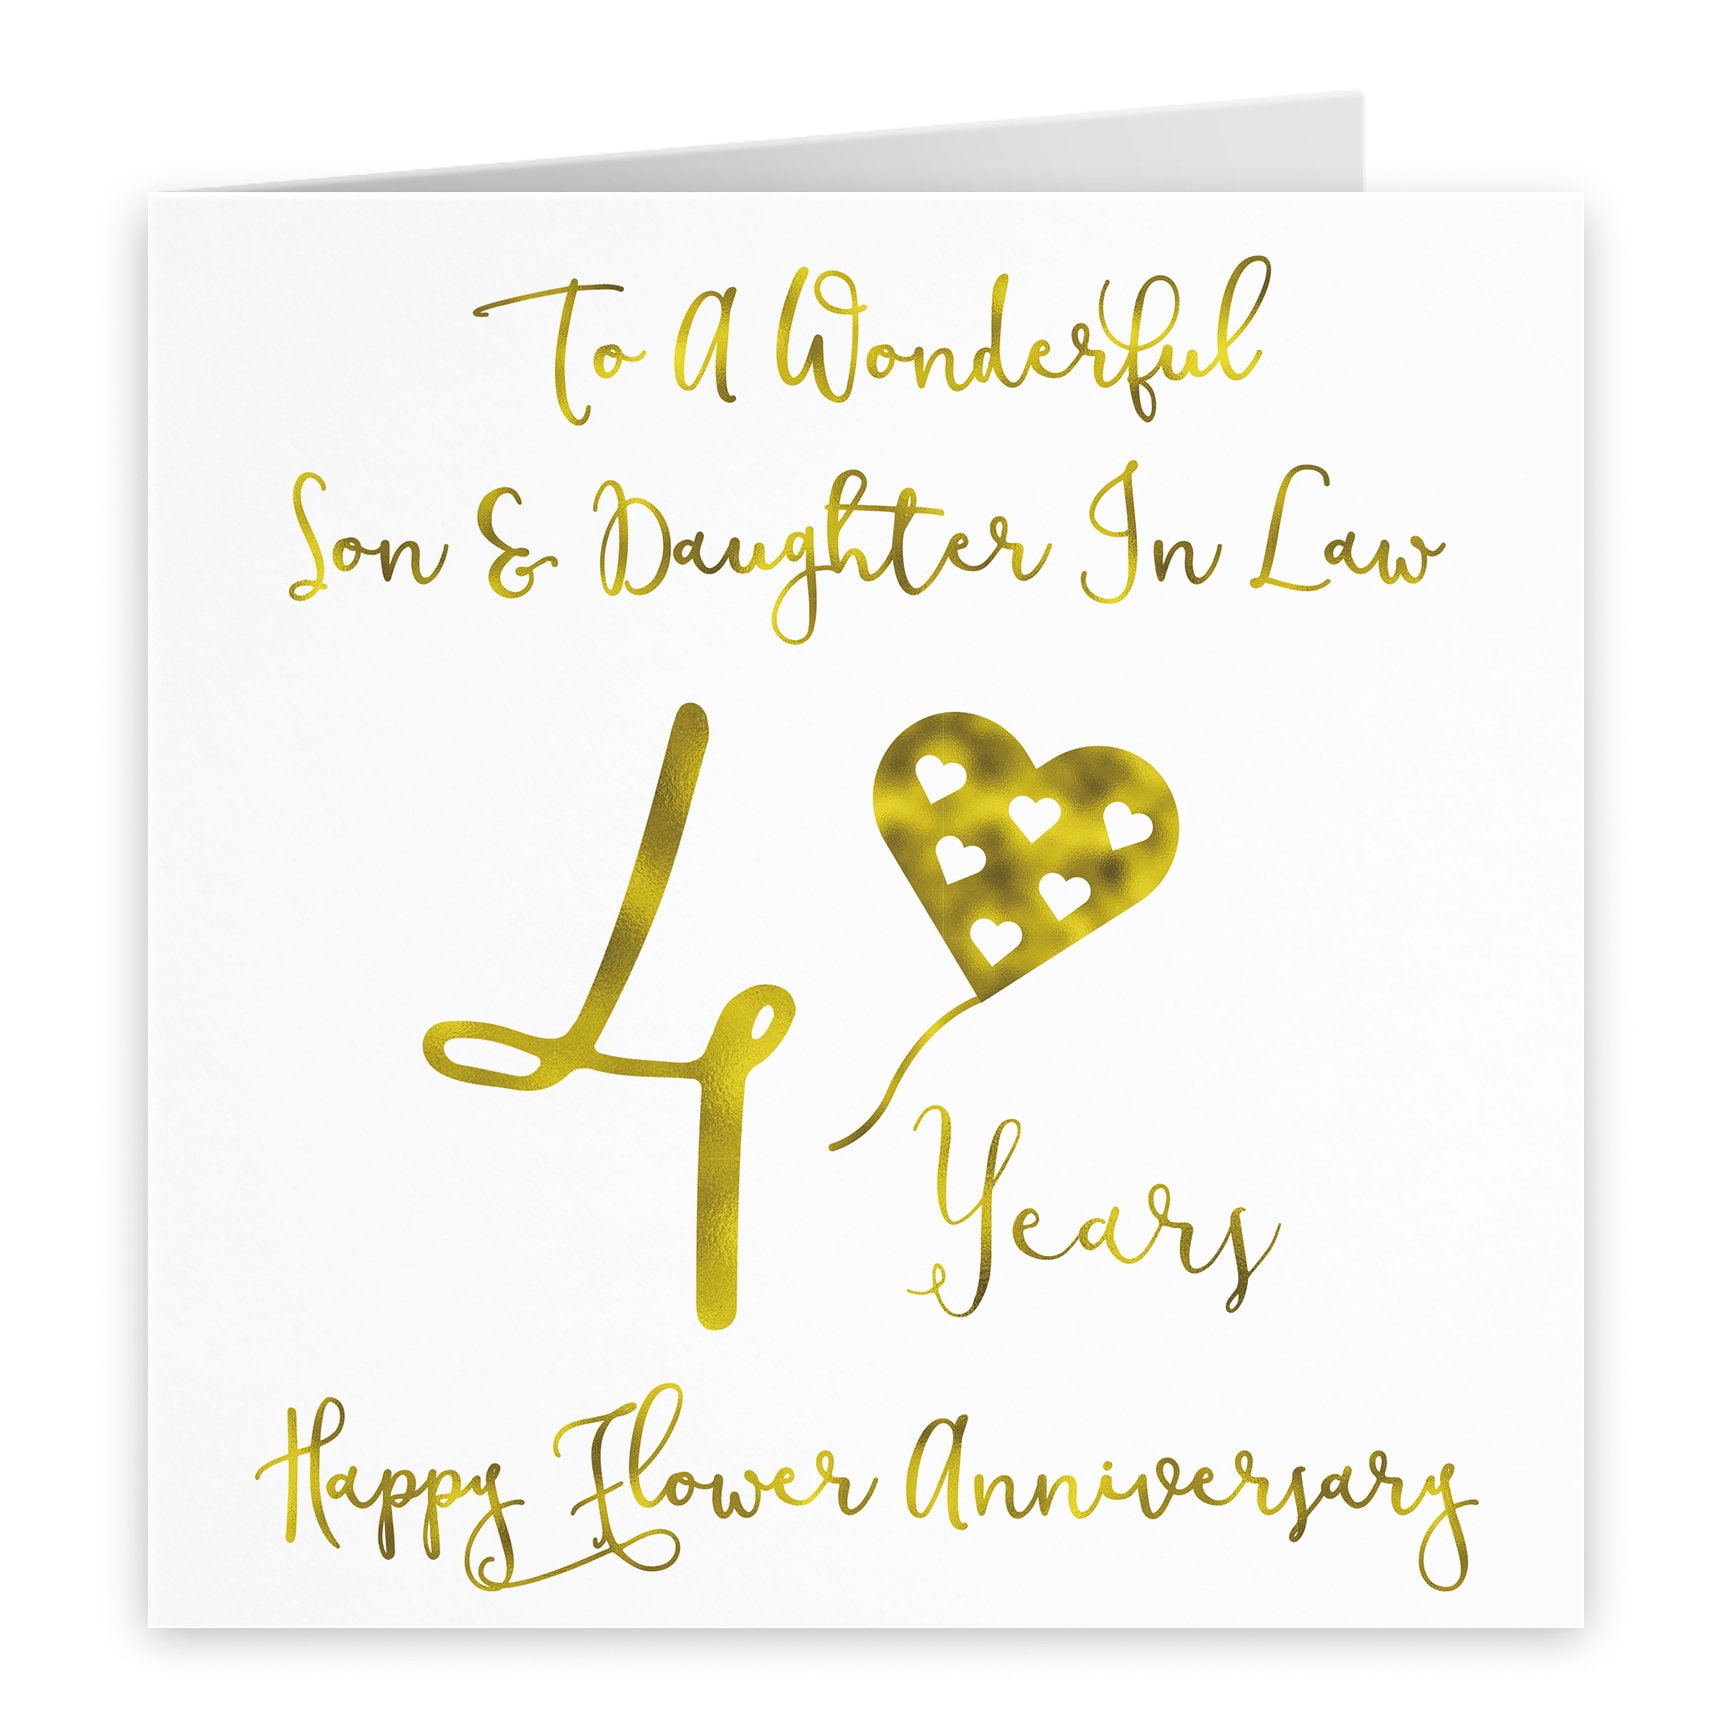 On Your Flowers Anniversary Sentimental Verse 4 Years Daughter & Son in Law 4th Wedding Anniversary Gift Set Card 2 Keyrings & Fridge Magnet Present 